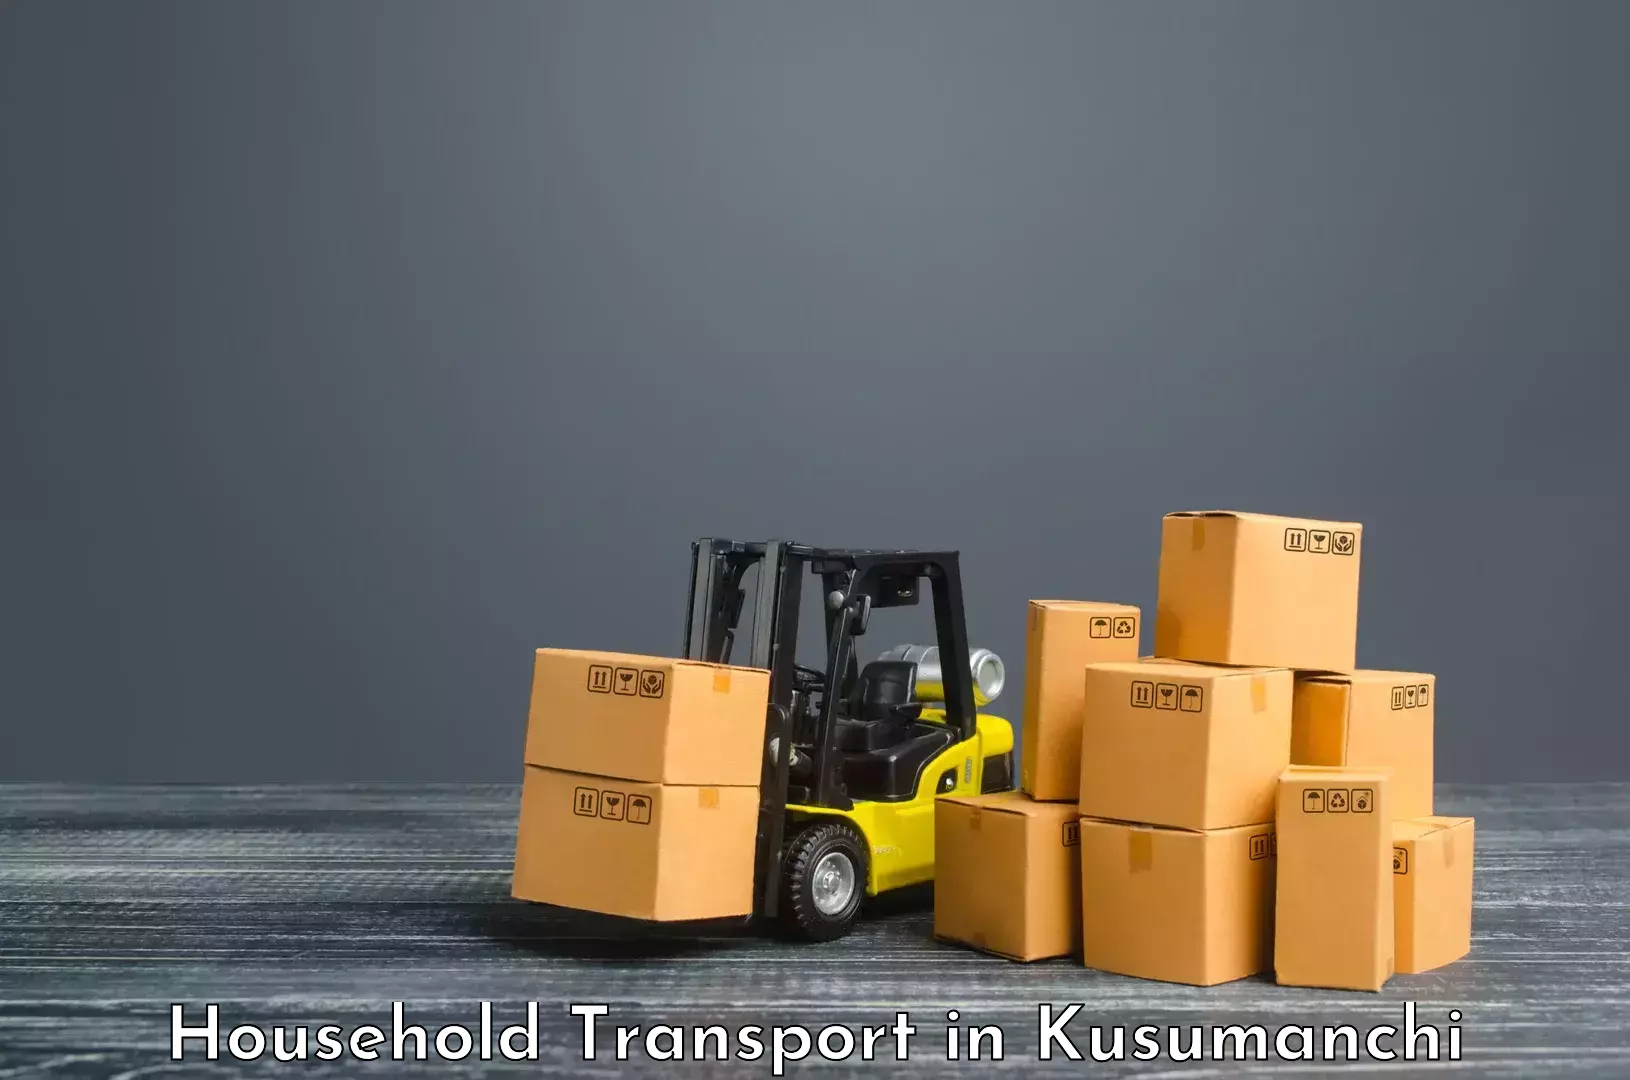 Moving and handling services in Kusumanchi